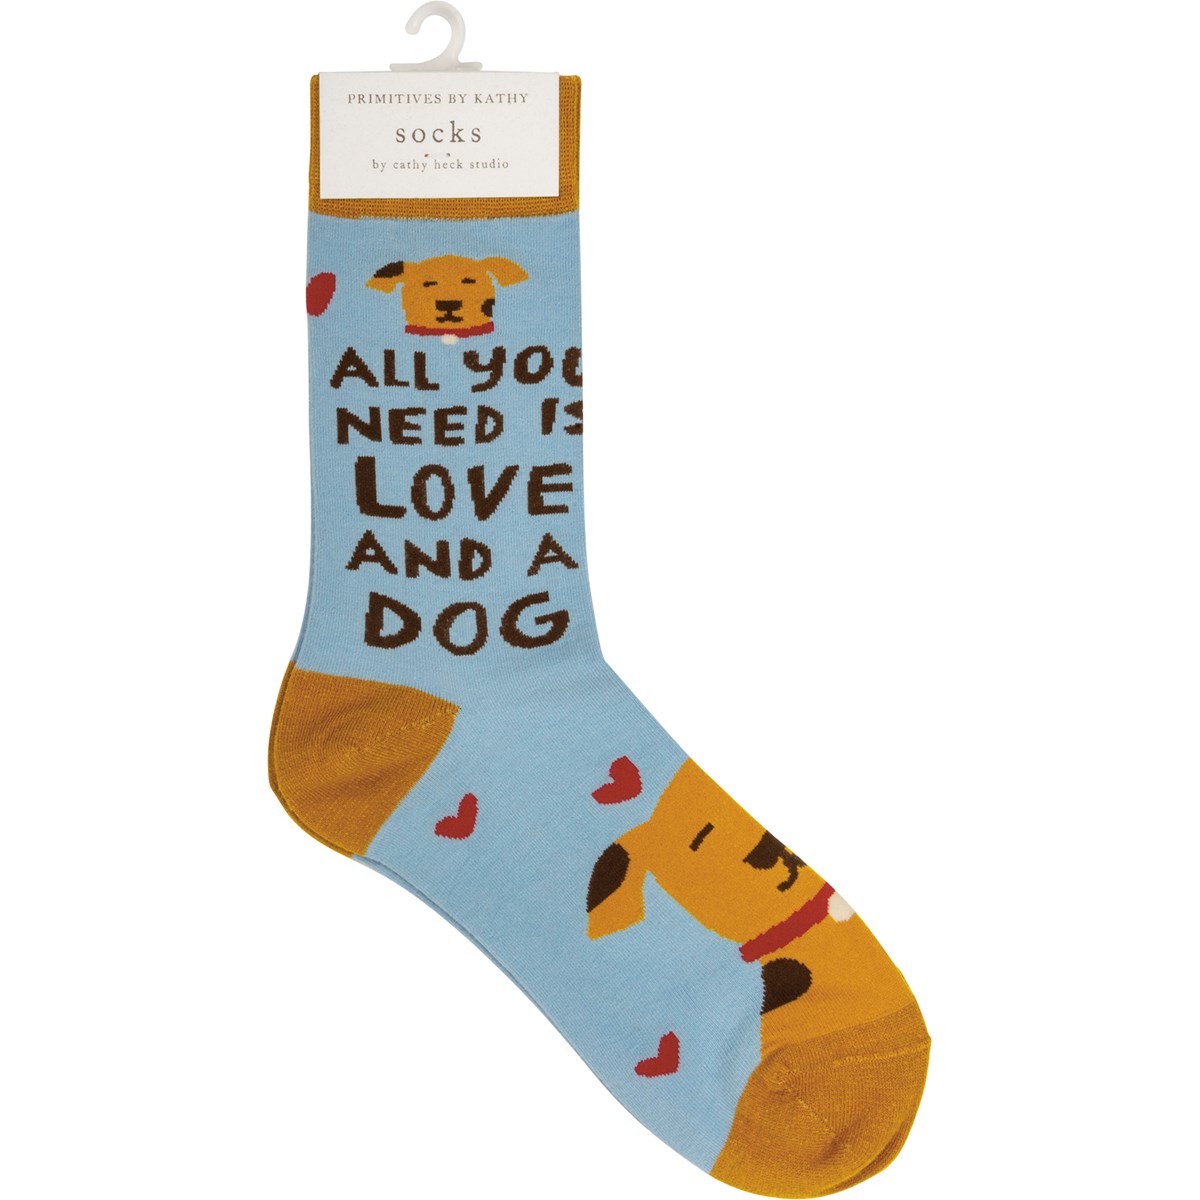 Need Is Love And A Dog Socks - Cotton, Nylon, Spandex